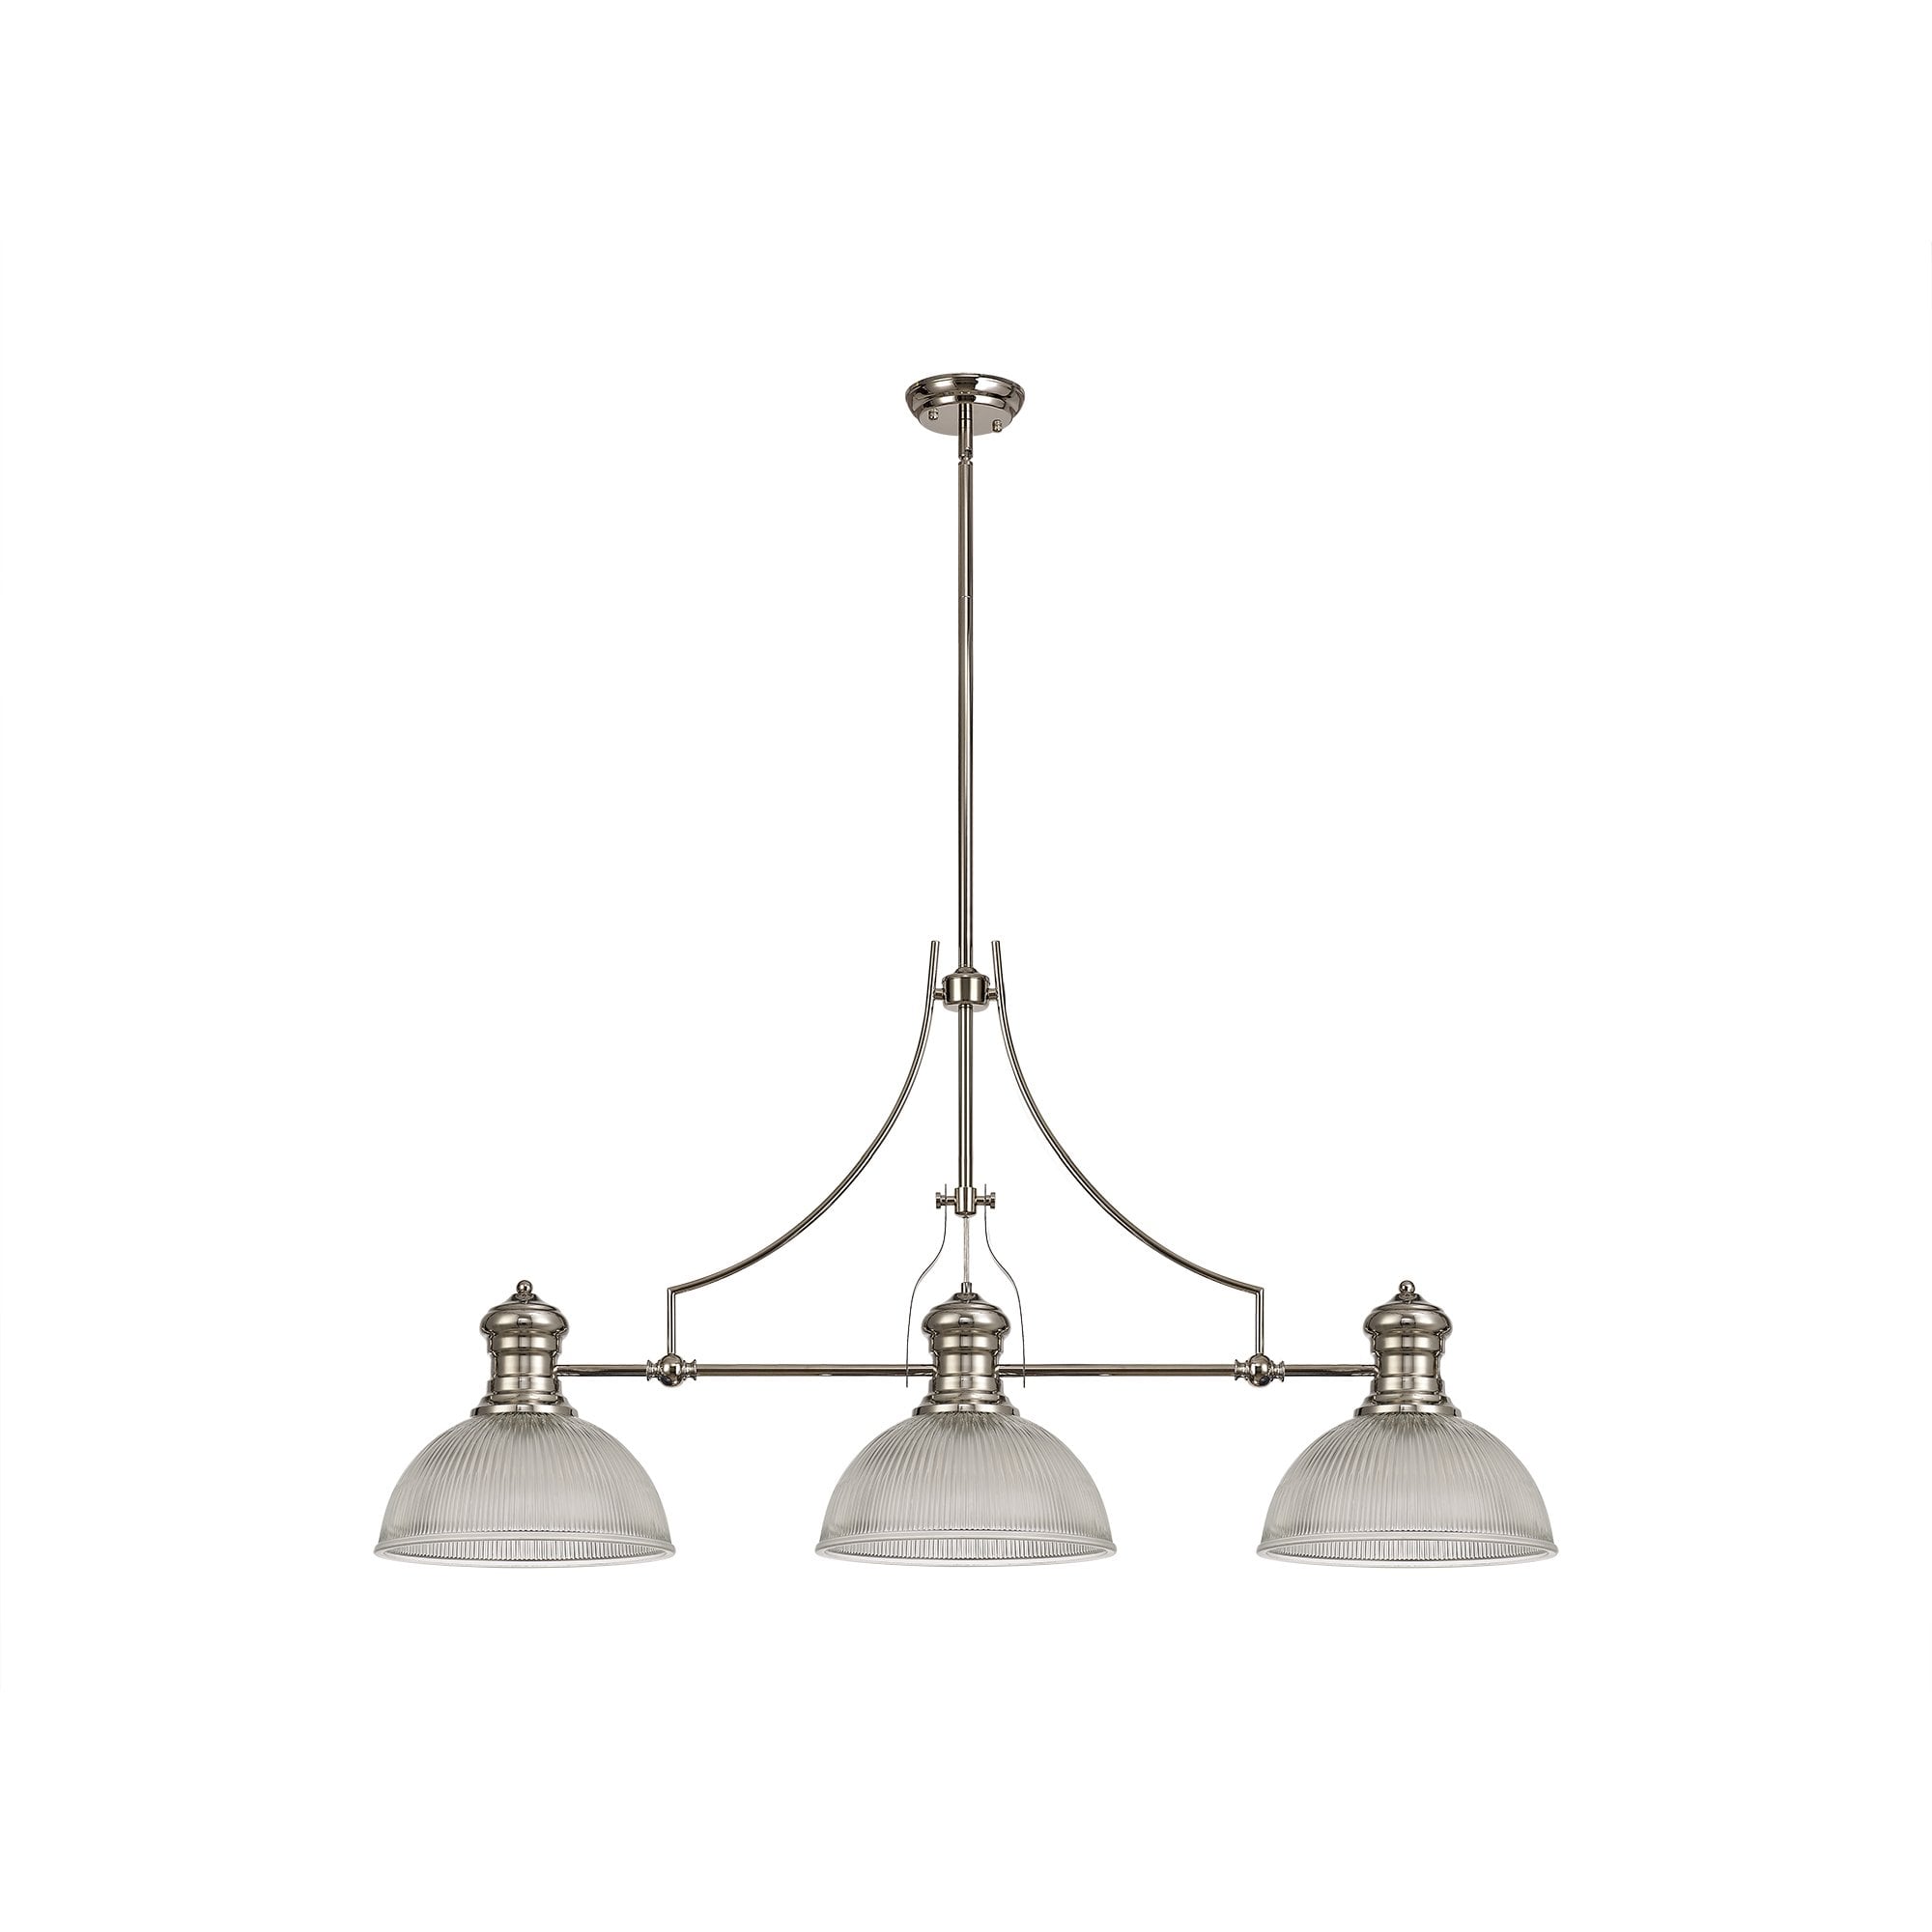 3 Light Telescopic Pendant E27 With 30cm Dome Glass Shade, Polished Nickel/Clear